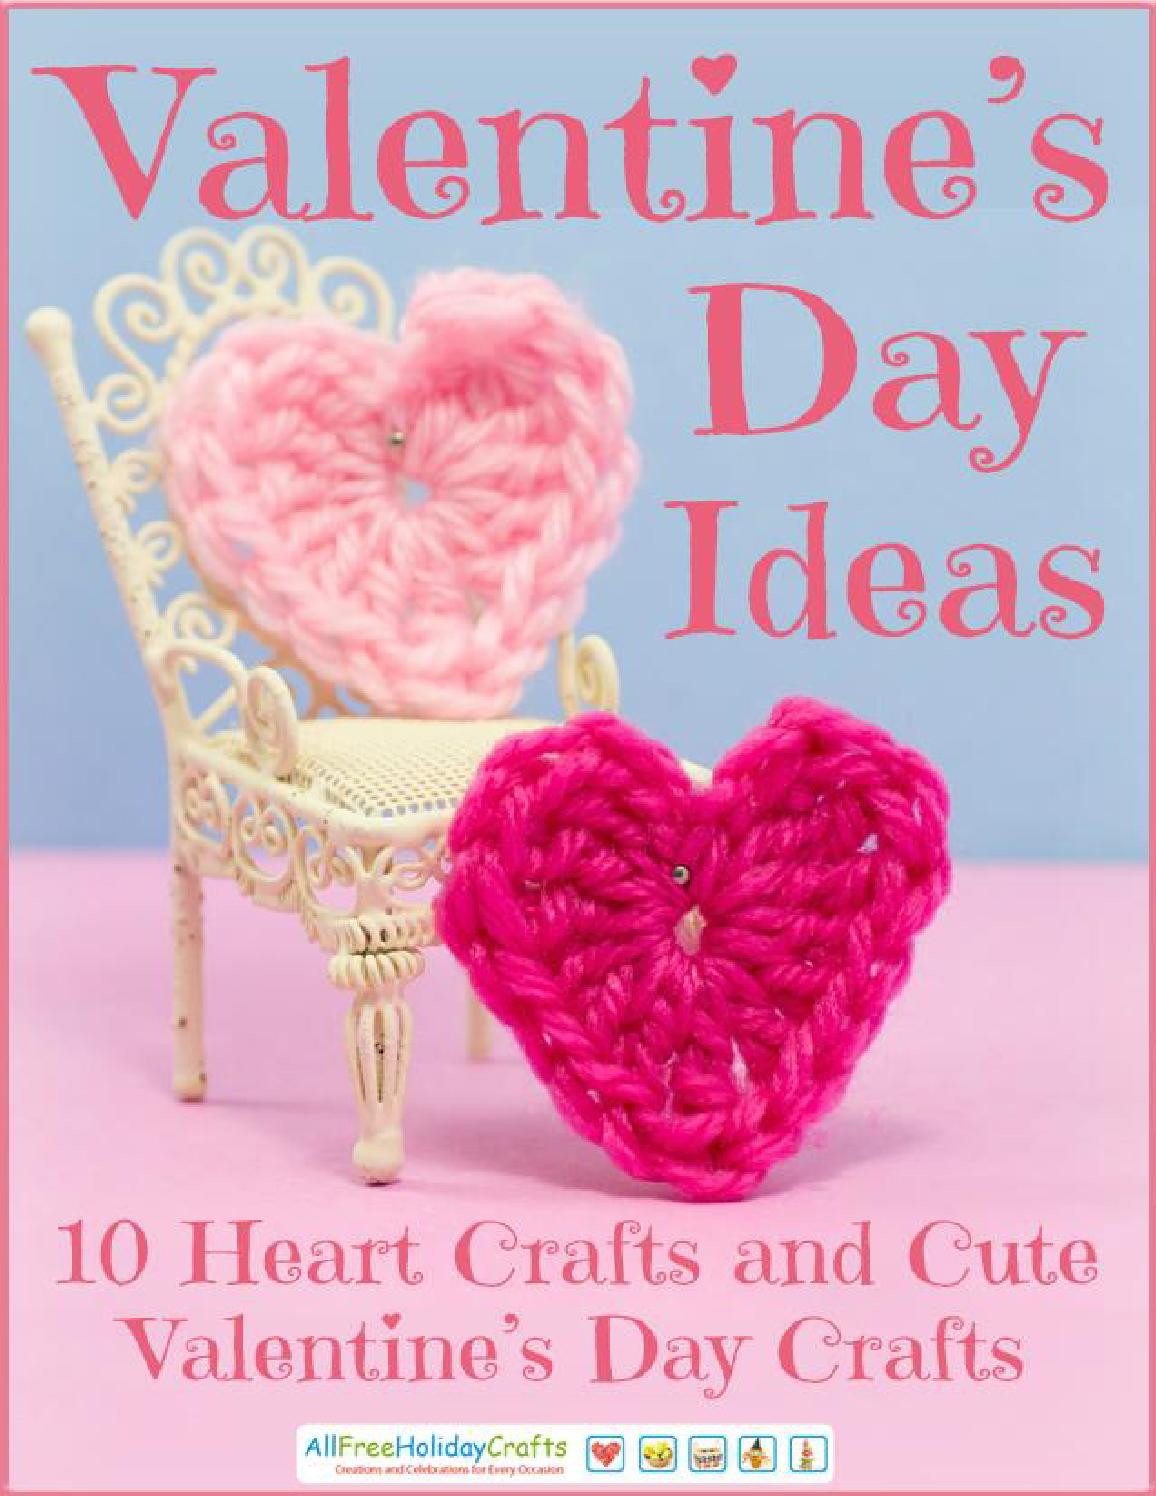 Cute Valentines Day Date Ideas
 Valentines day ideas heart crafts and cute valentines day